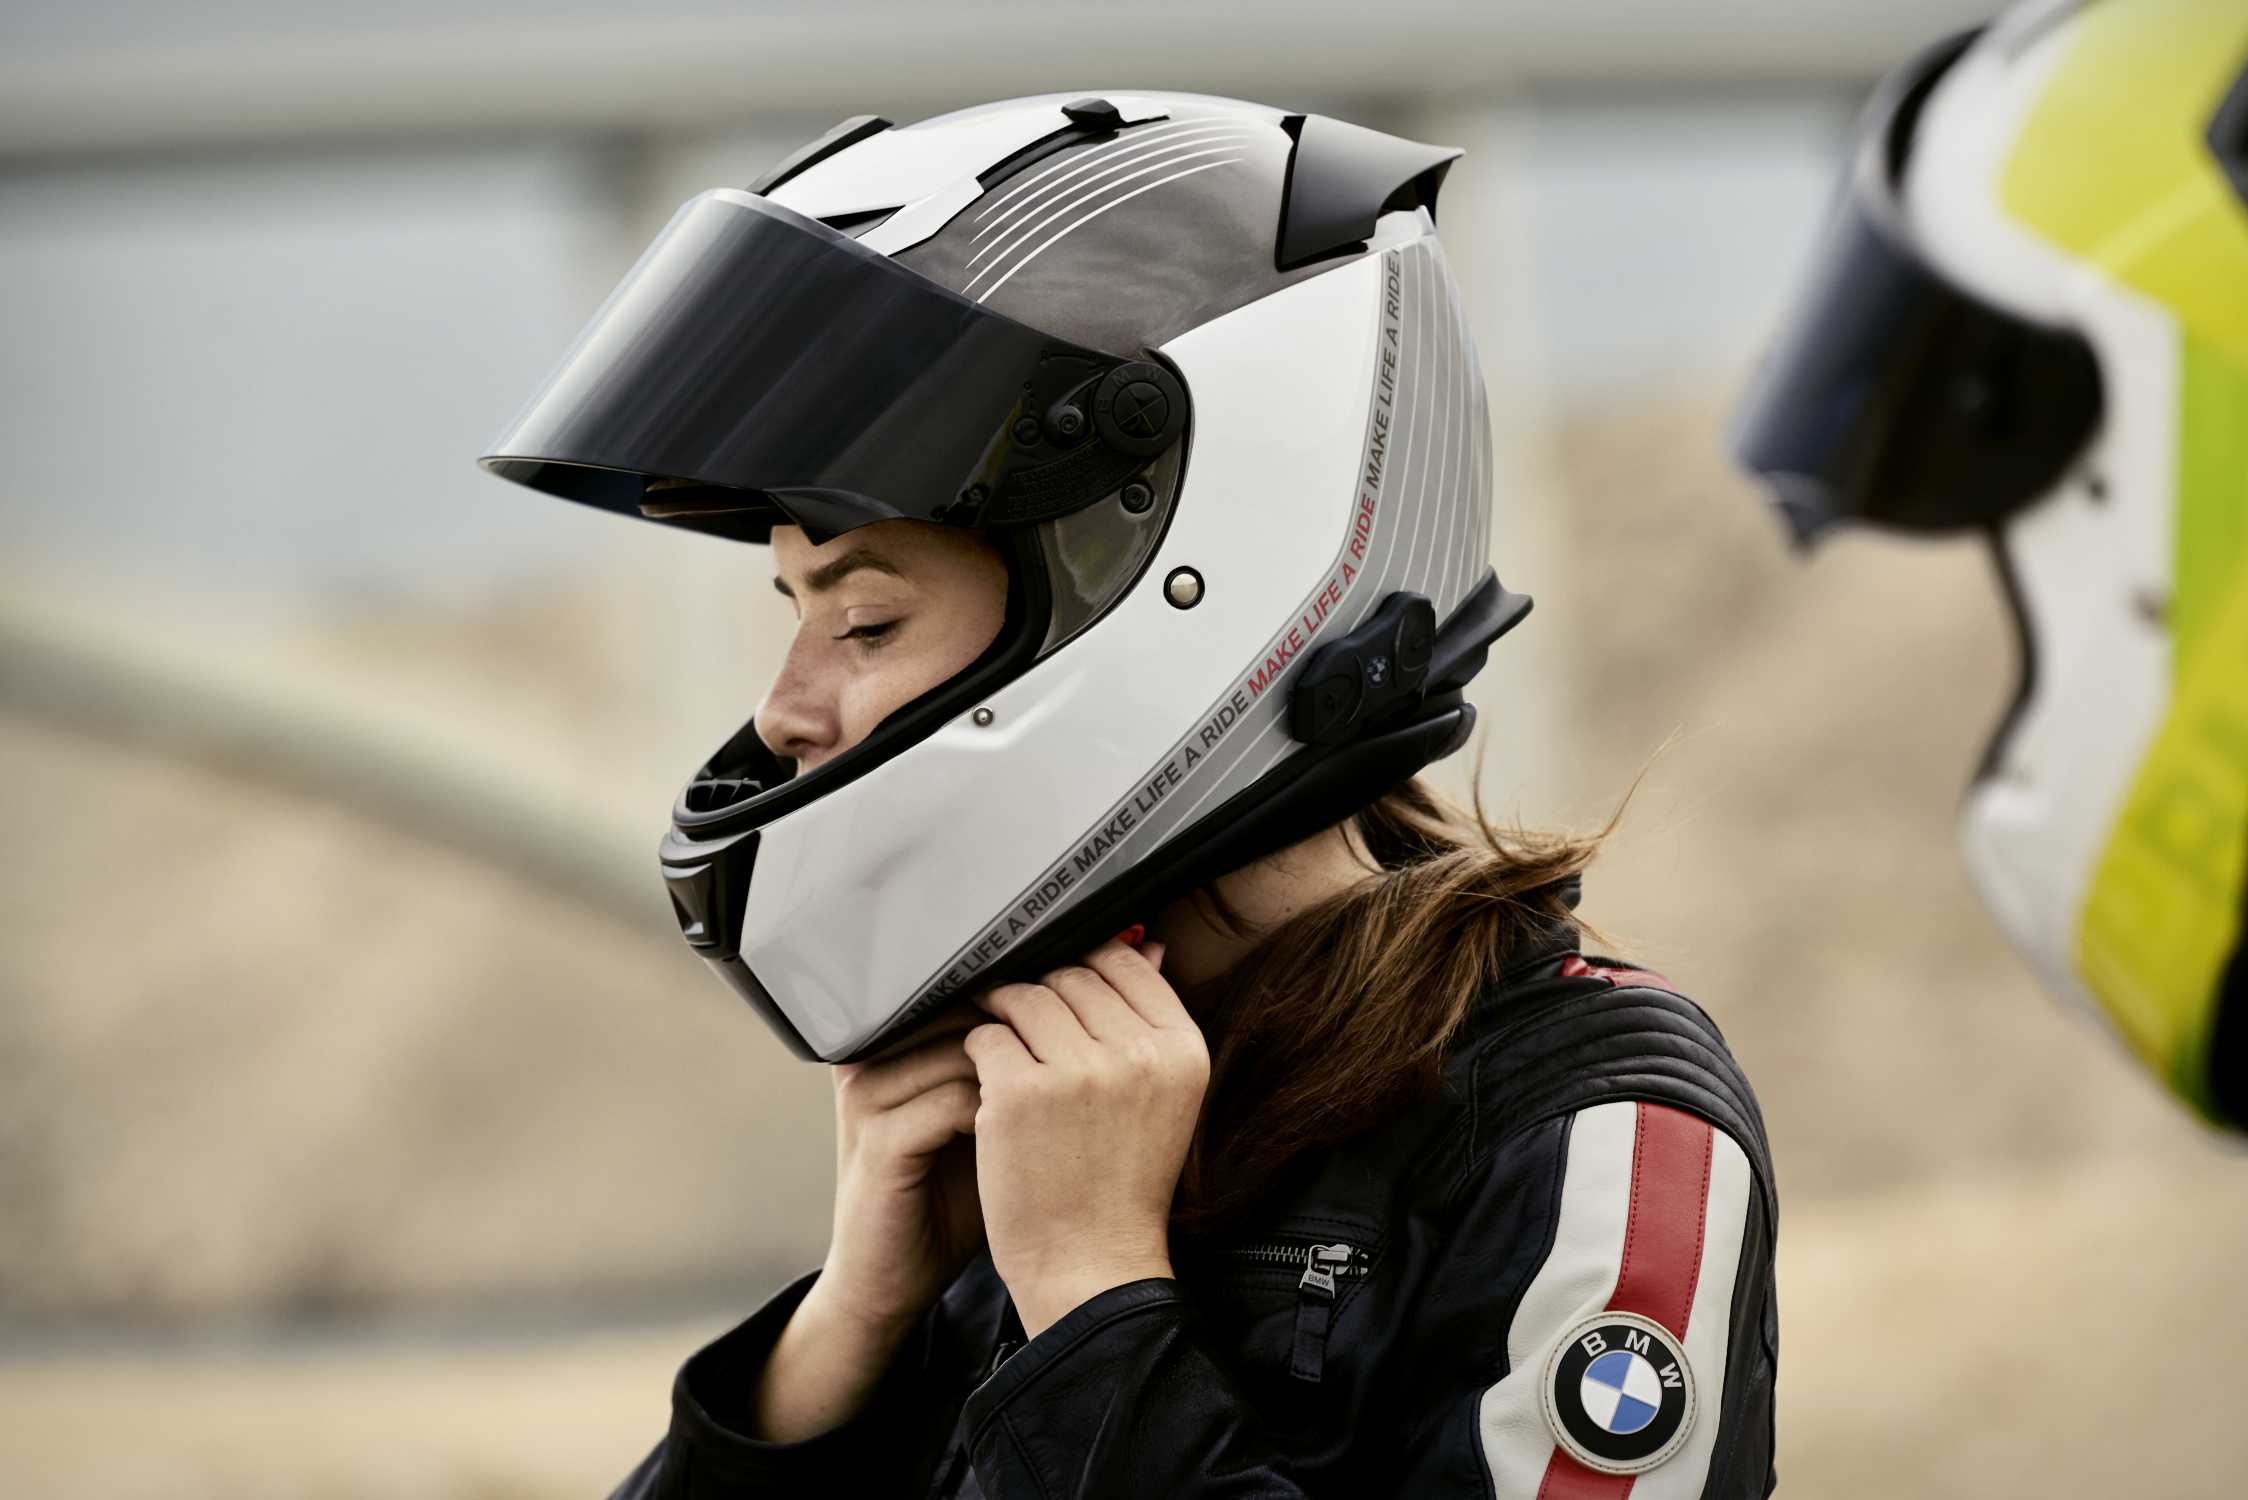 Retroactive 5 Year Extended Warranty on these BMW Helmets • Total Motorcycle